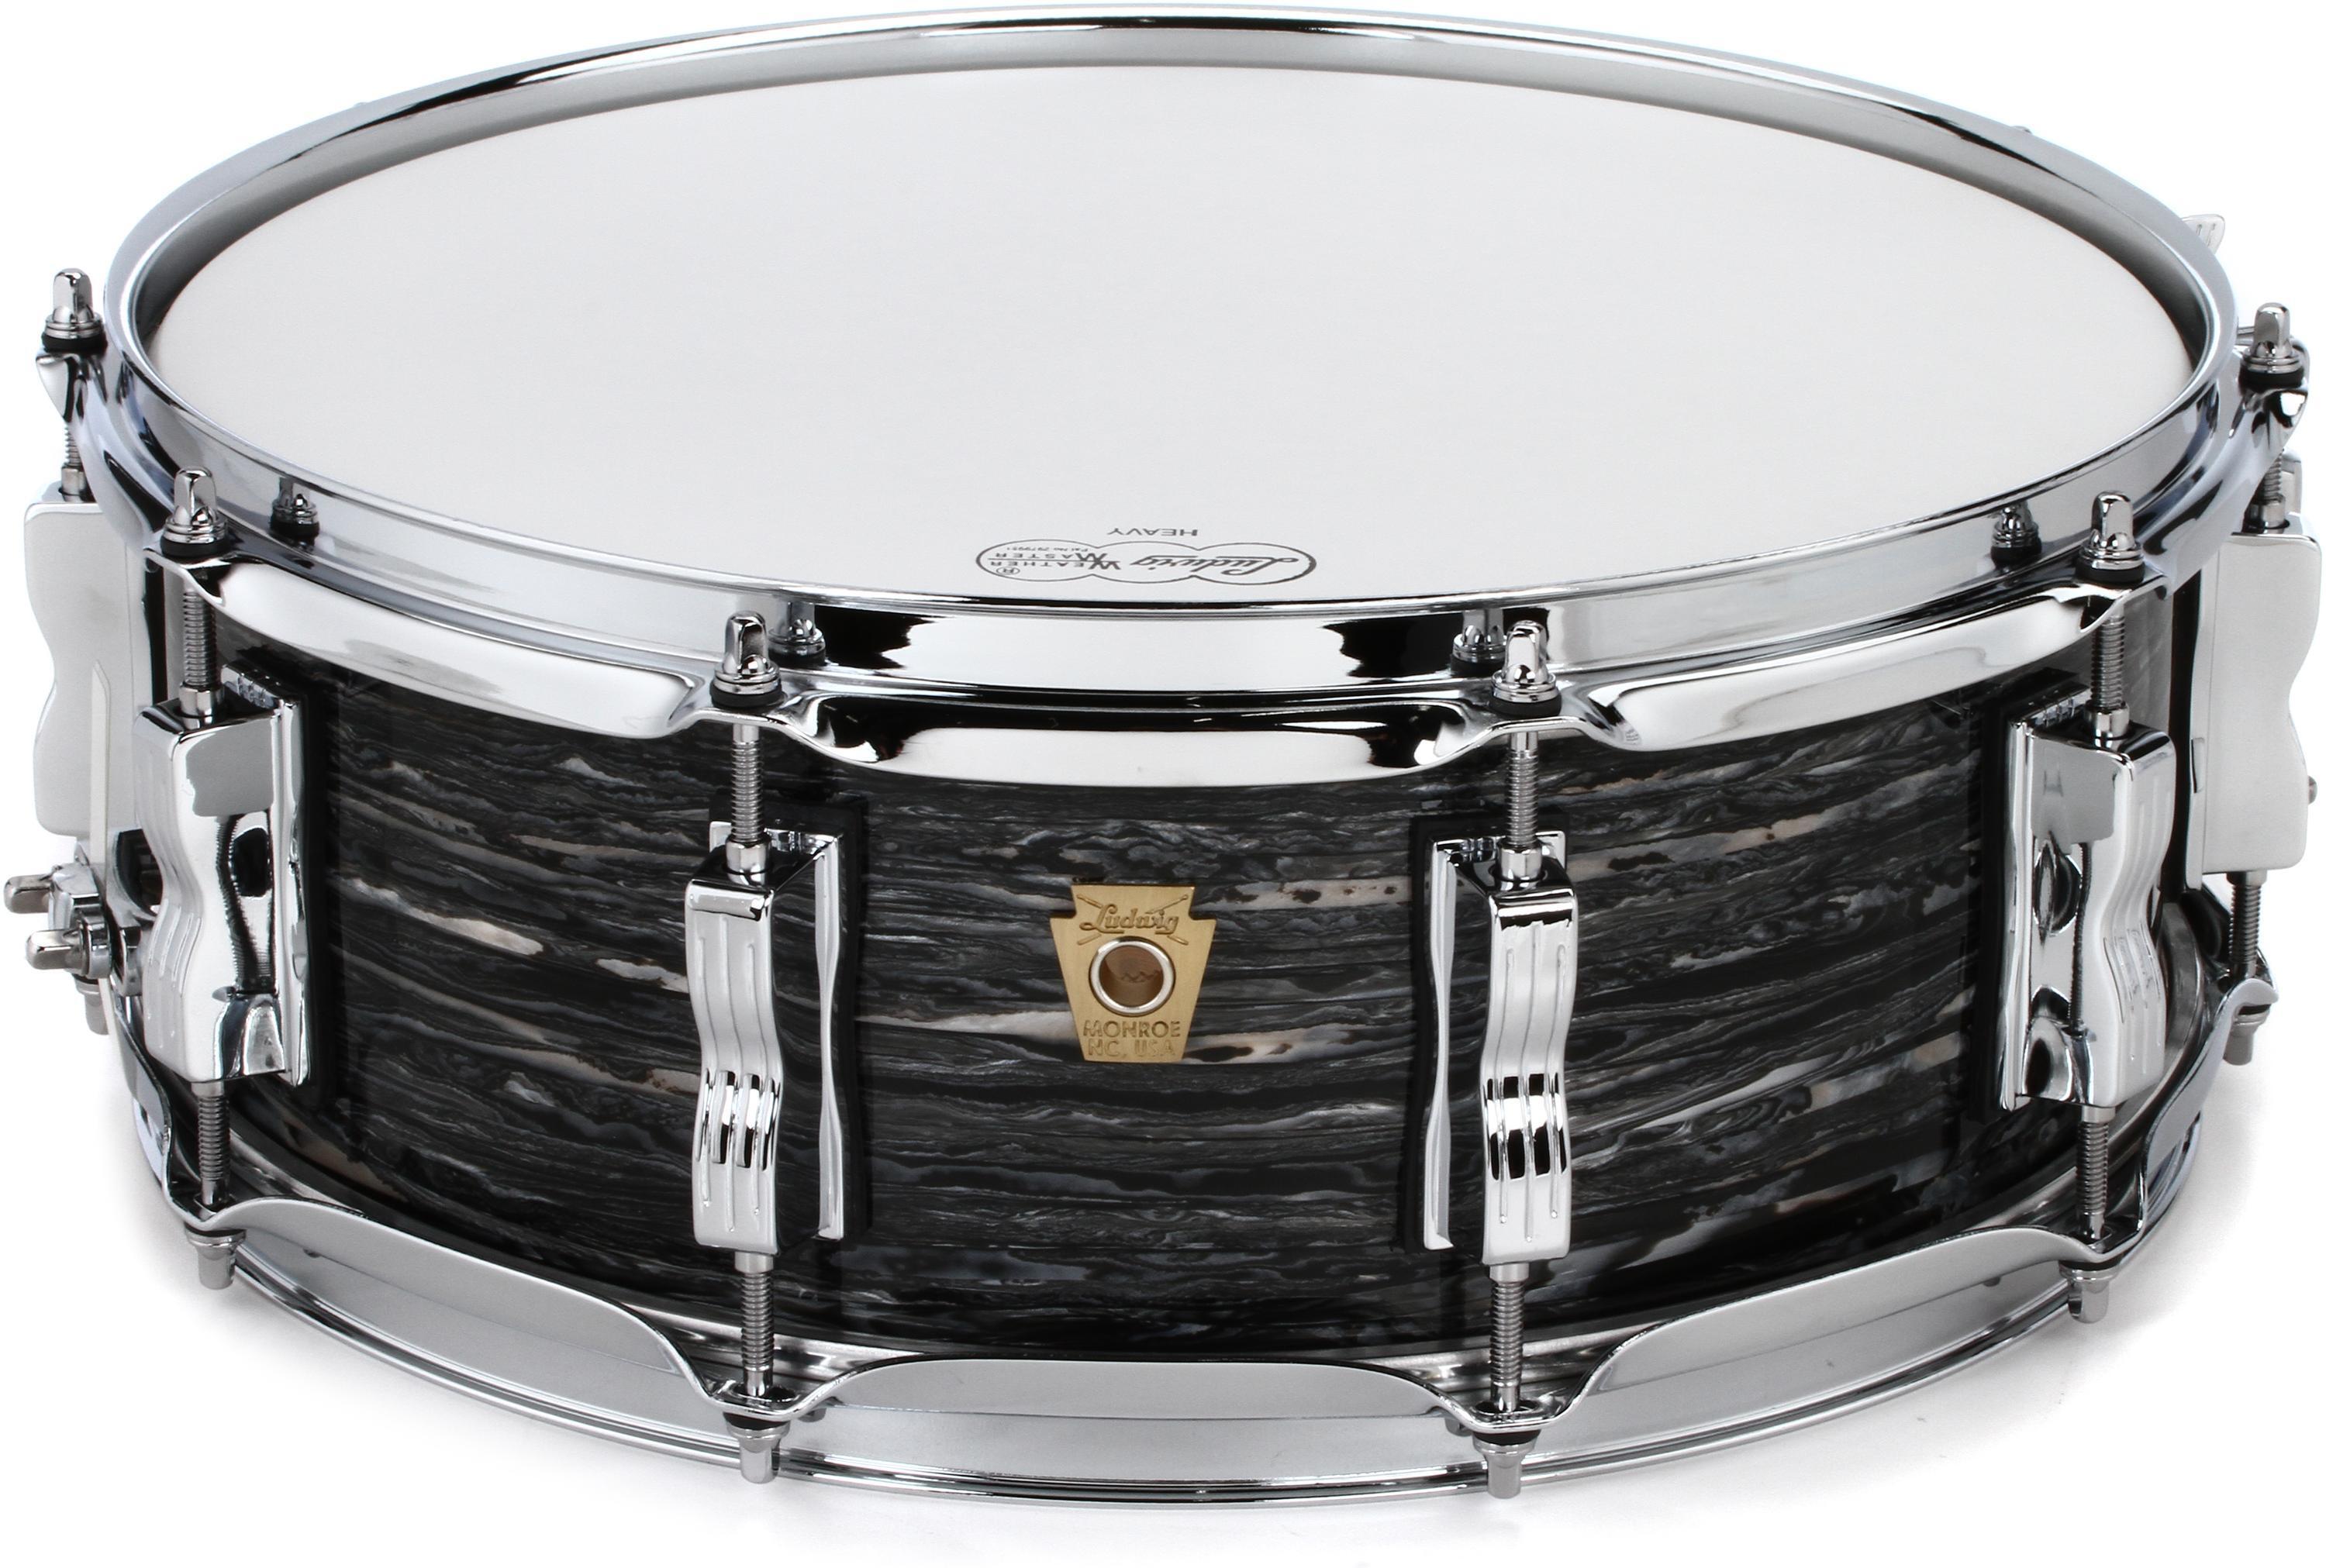 Ludwig Classic Maple Snare Drum - 5 x 14 inch - Vintage Black Oyster